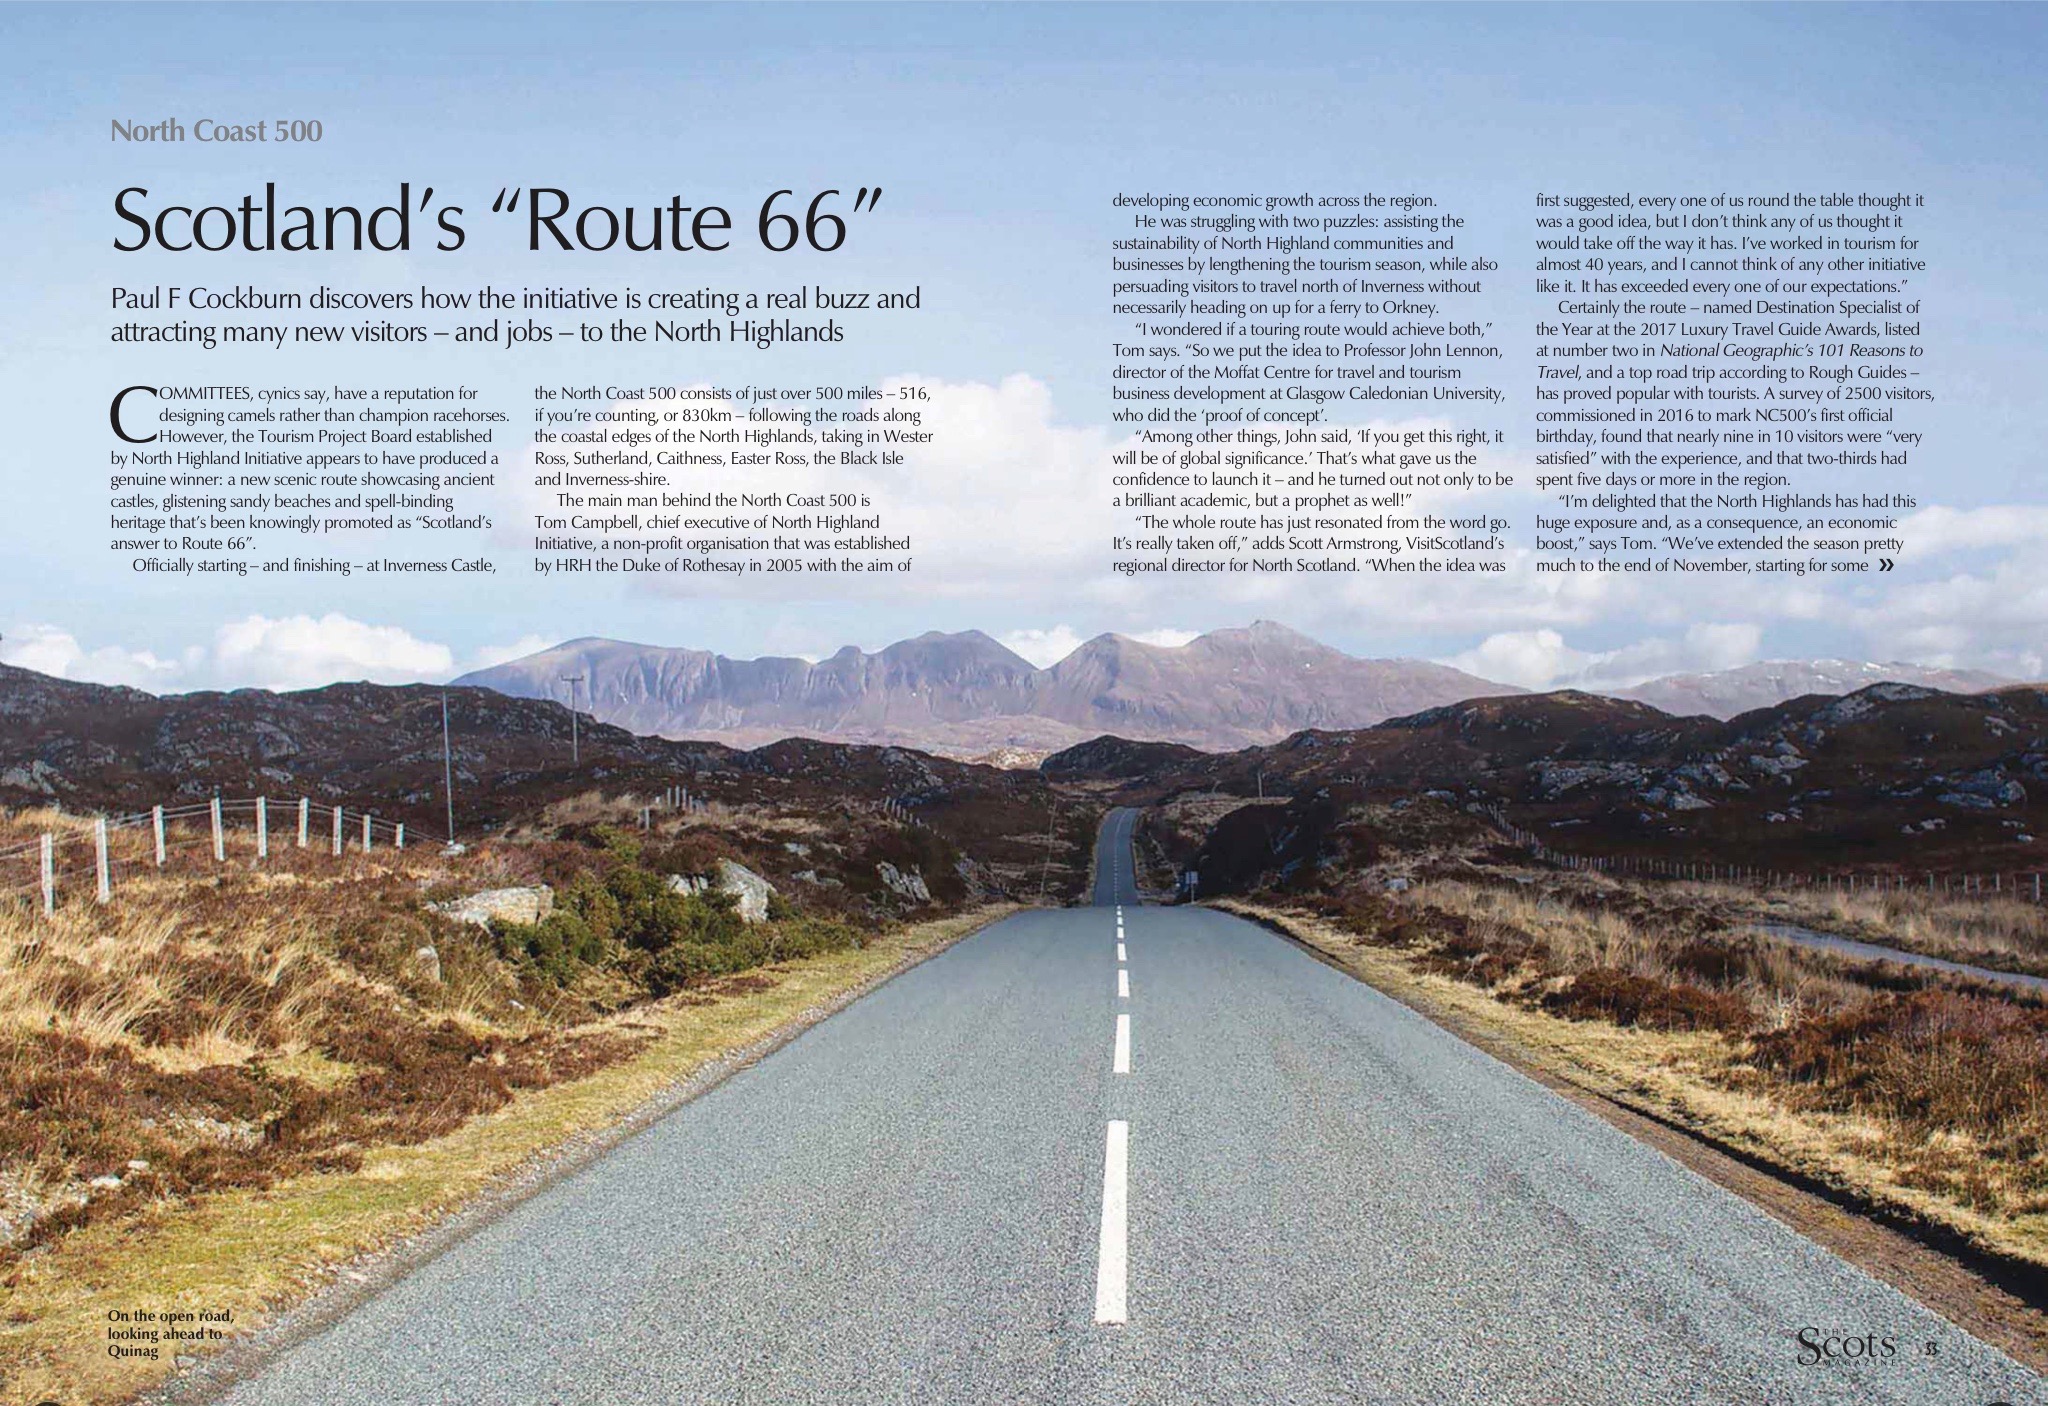 Opening spread of article, featuring image of road heading towards Quinag.